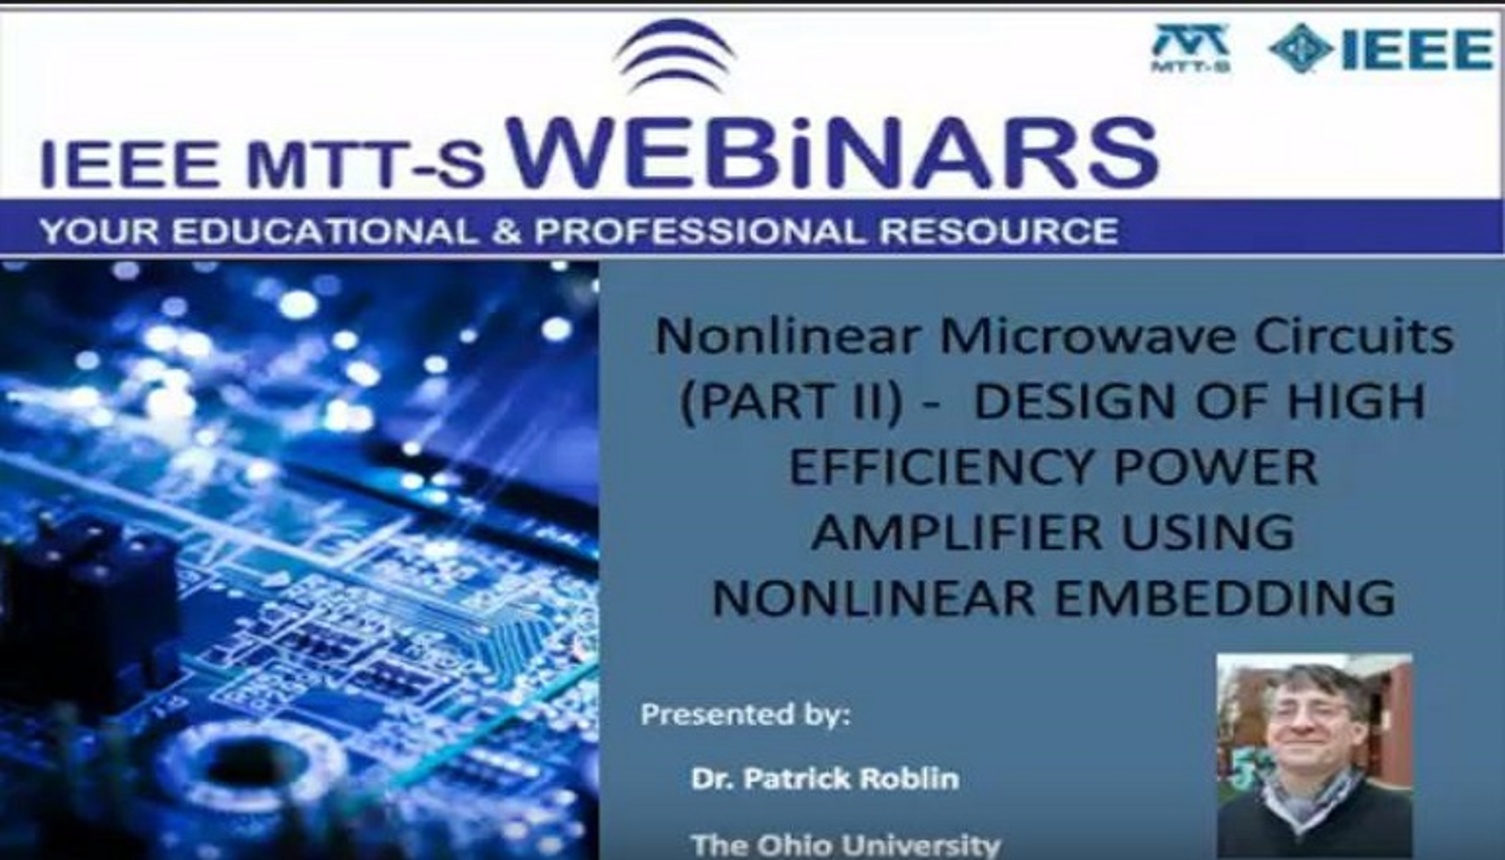 Nonlinear Microwave Circuits Part 2 Design of High Efficiency Power Amplifier Using Nonlinear Embedding Video